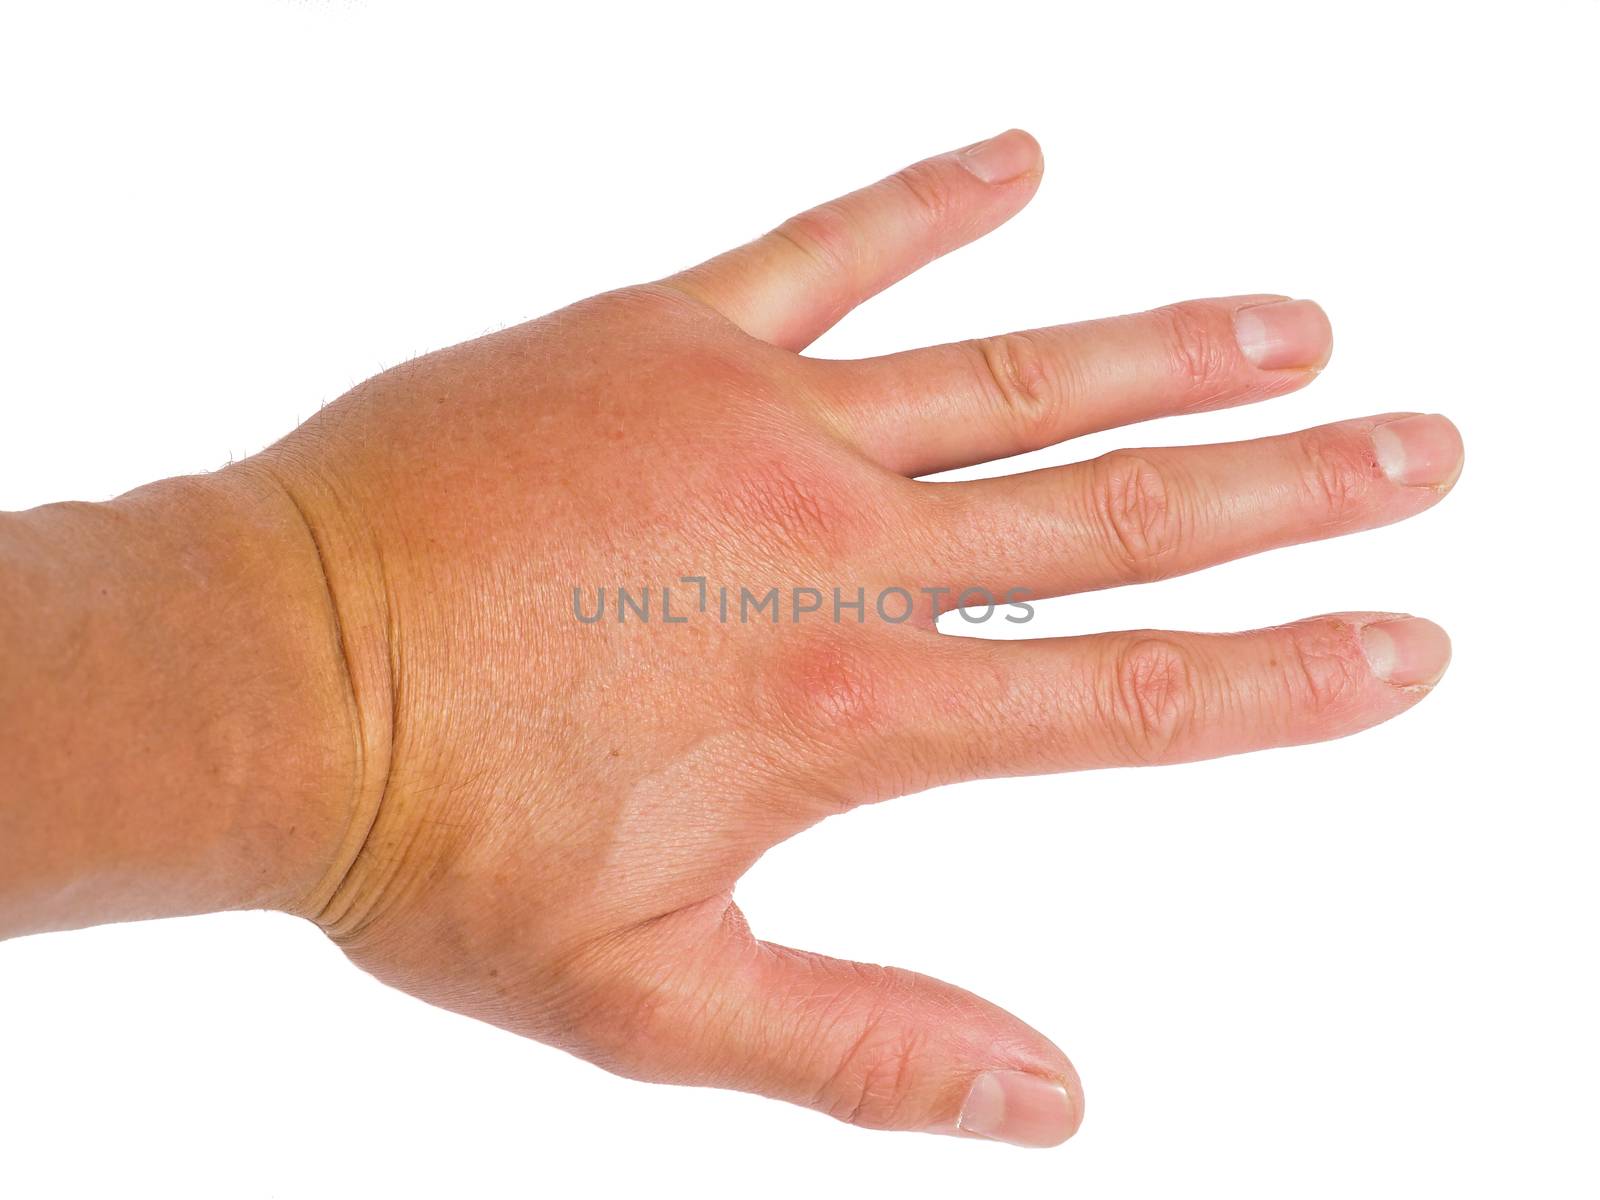 Male person showing swollen knuckles on left hand isolated on wh by Arvebettum